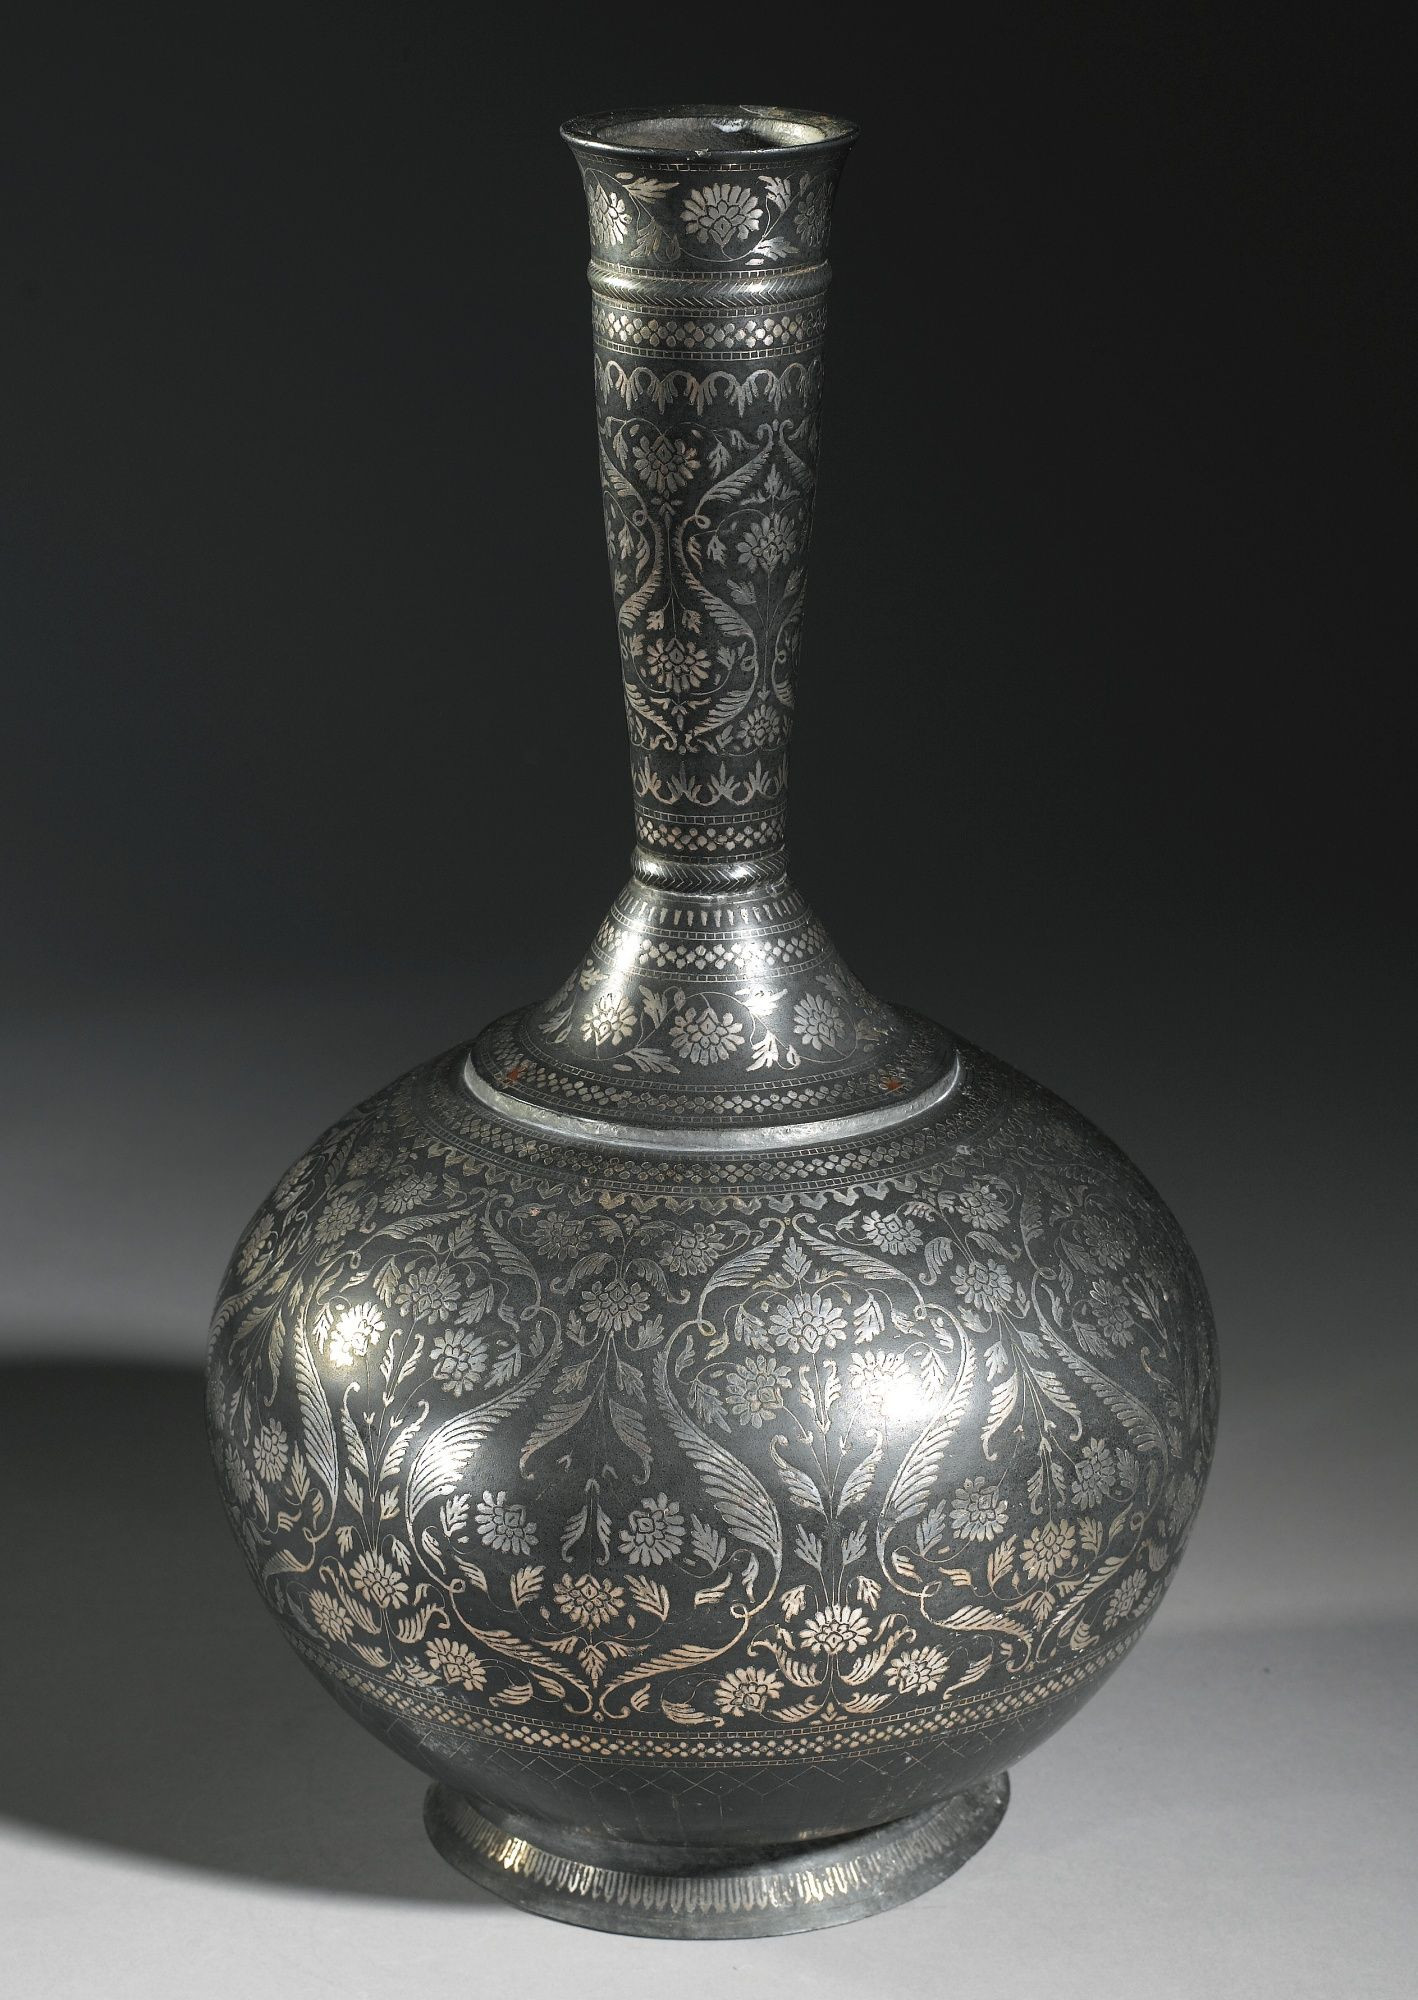 tall slim vases cheap of a monumental bidriware bottle vase india 19th century the globular with a monumental bidriware bottle vase india 19th century the globular body on a thin everted foot with a tall slender neck widening towards the mouth